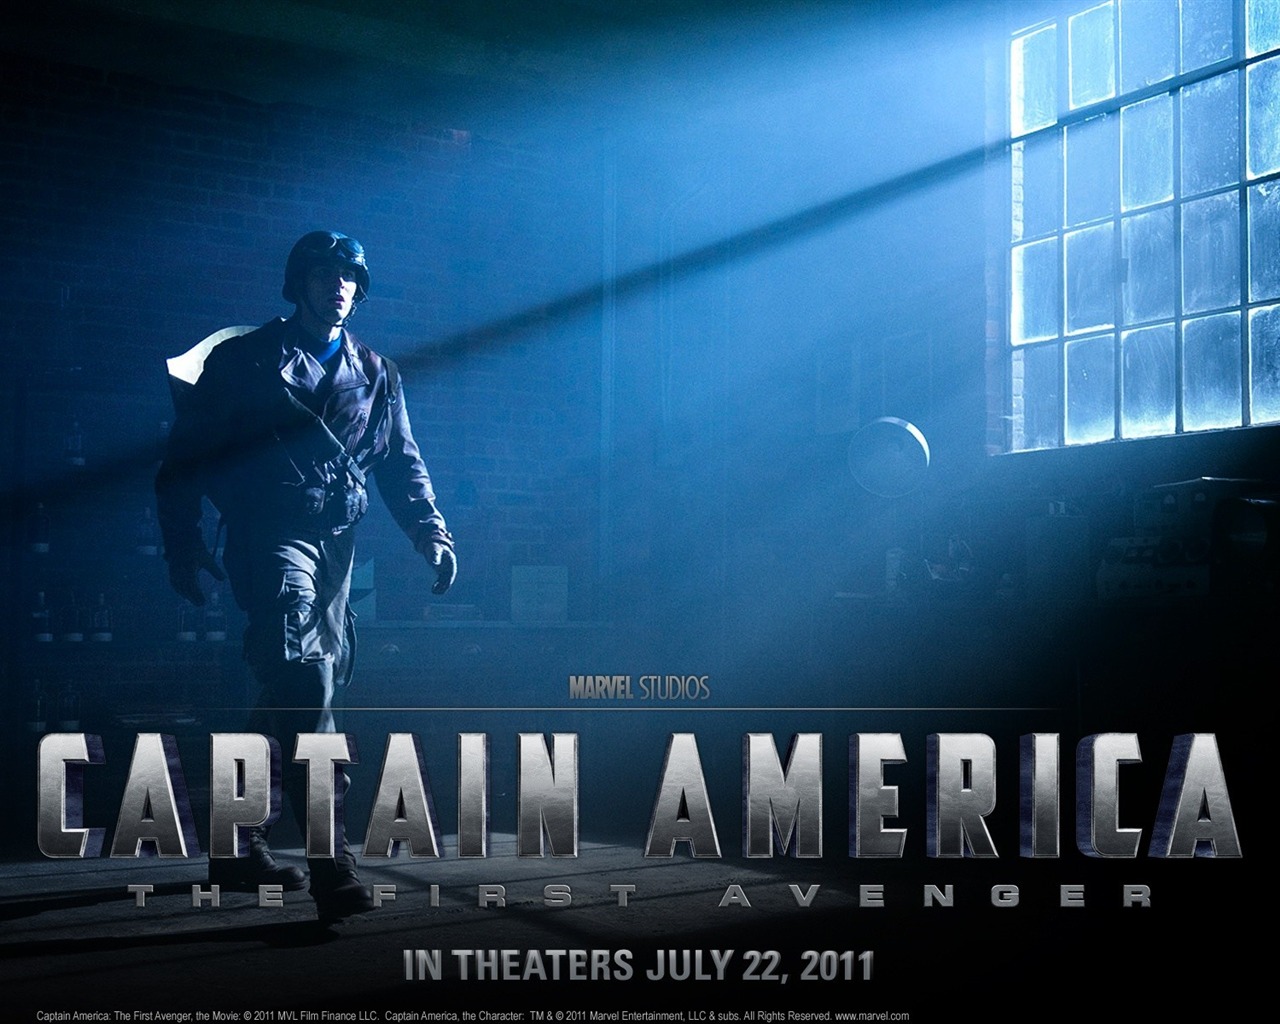 Captain America: The First Avenger wallpapers HD #17 - 1280x1024